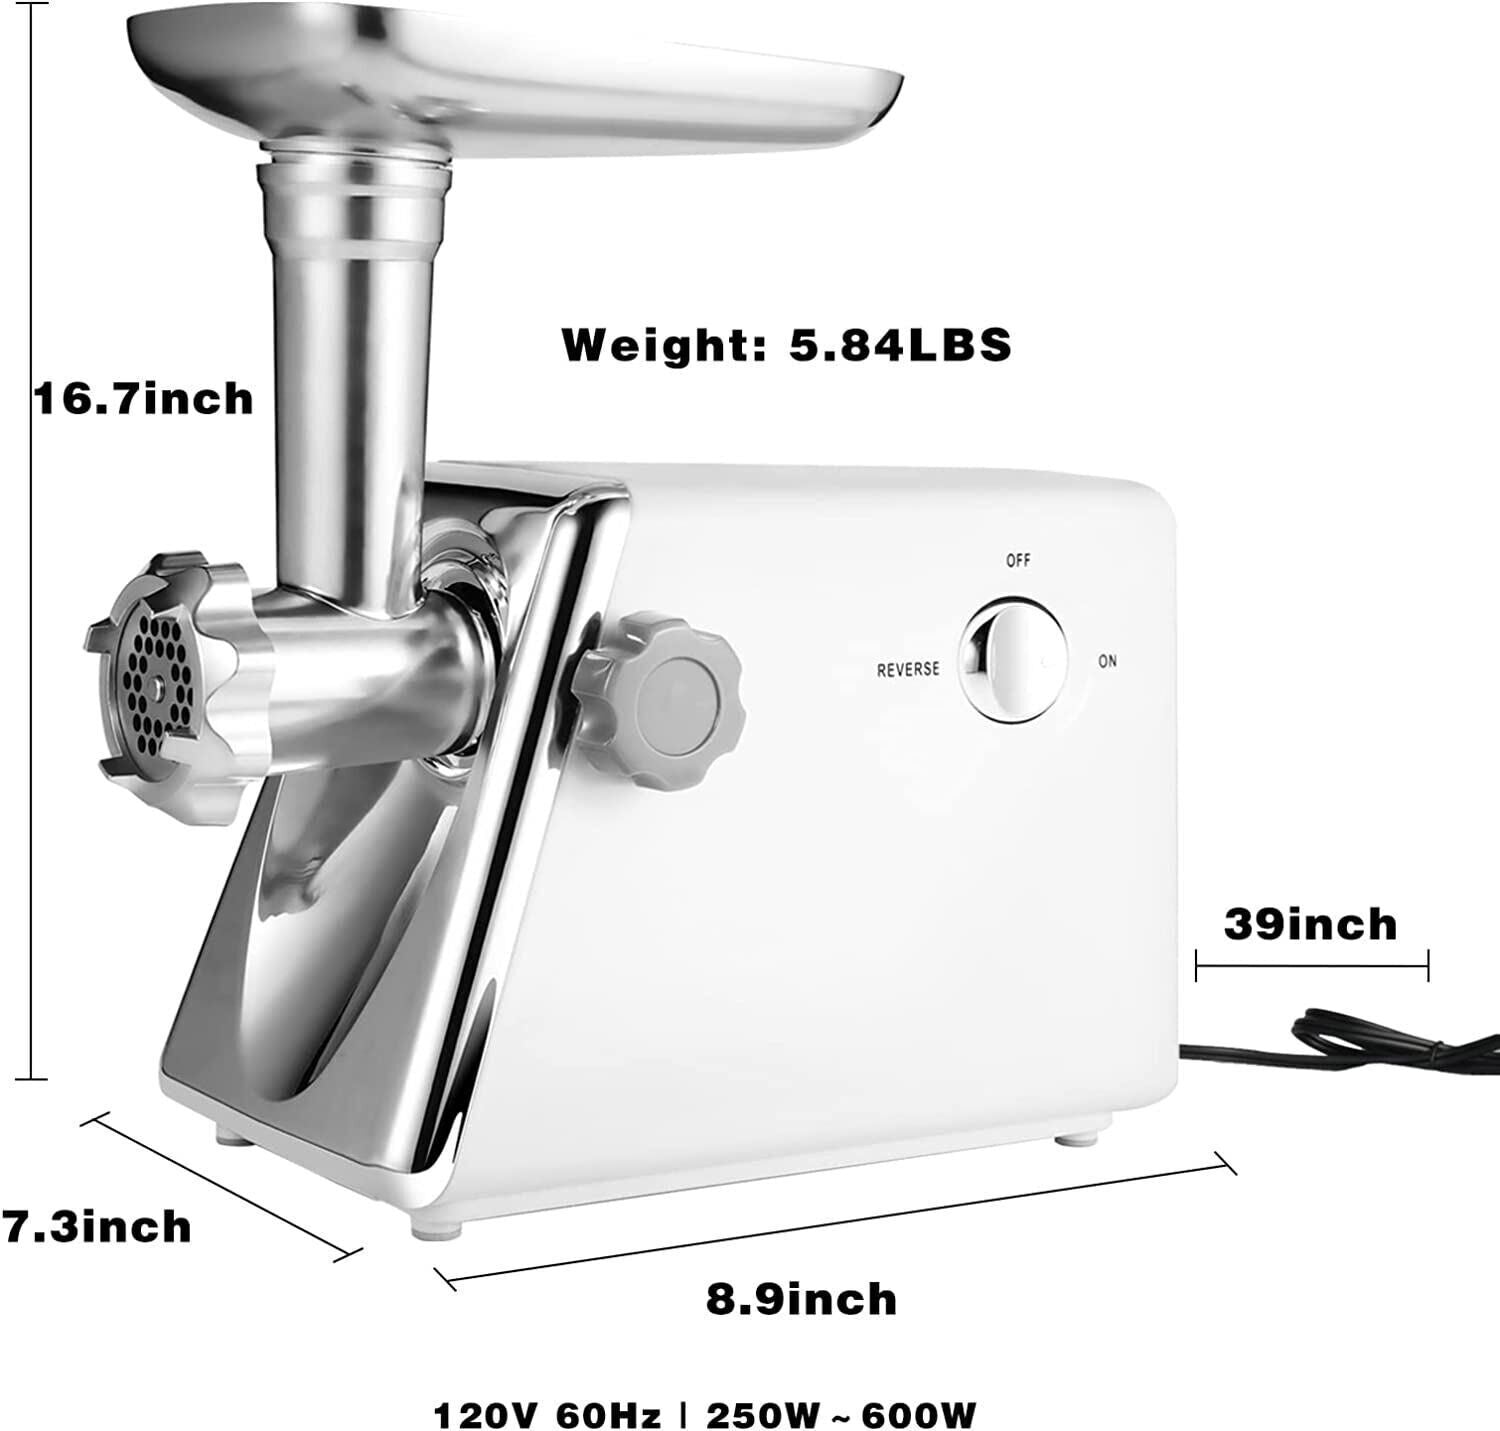 Electric Meat Grinder, Heavy Duty Meat Mincer, Food Grinder with